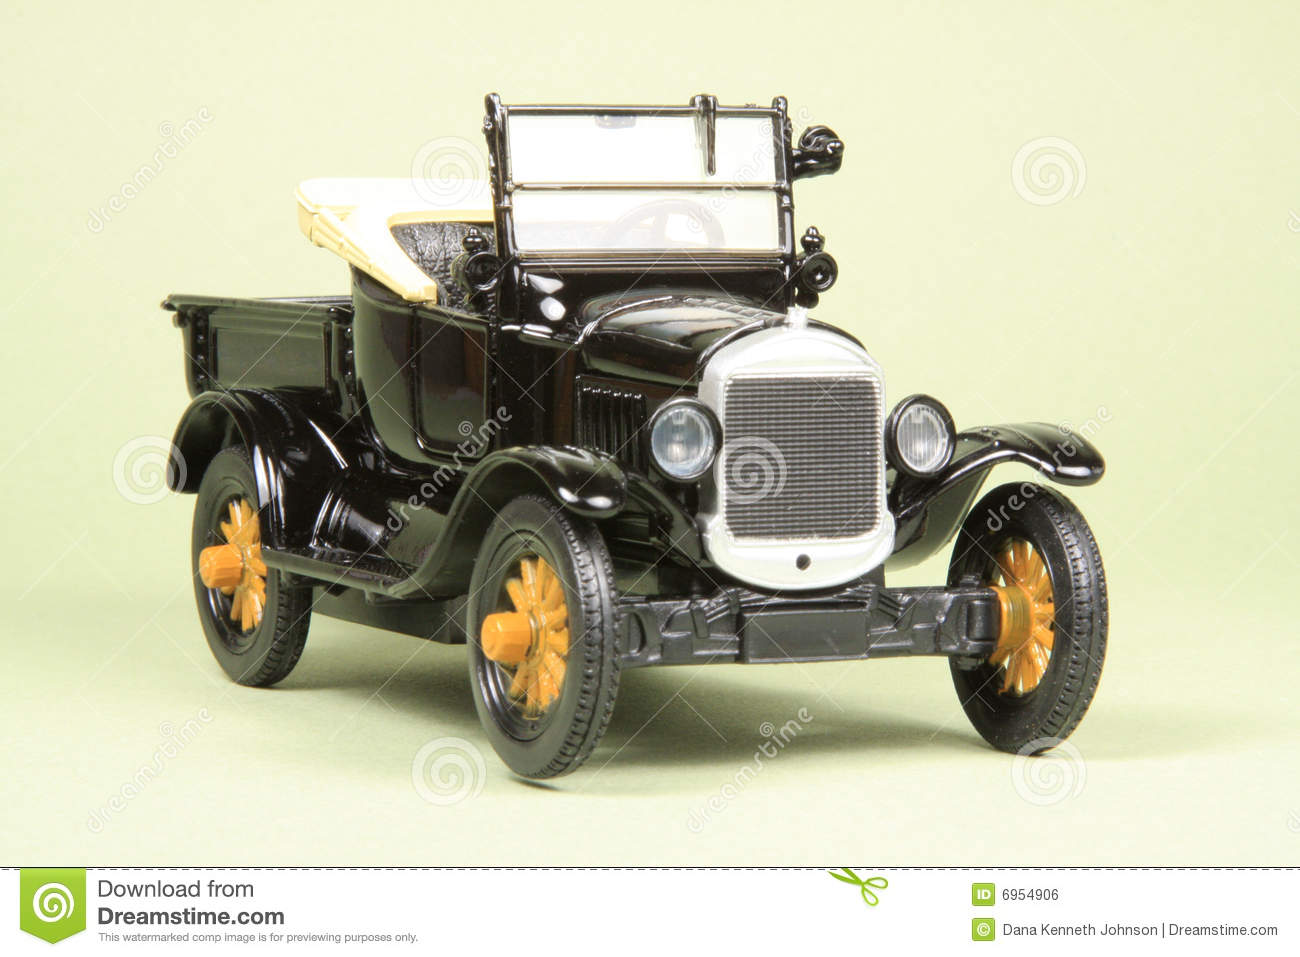 Ford Model T 1920 Pickup Royalty Free Stock Image   Image  6954906